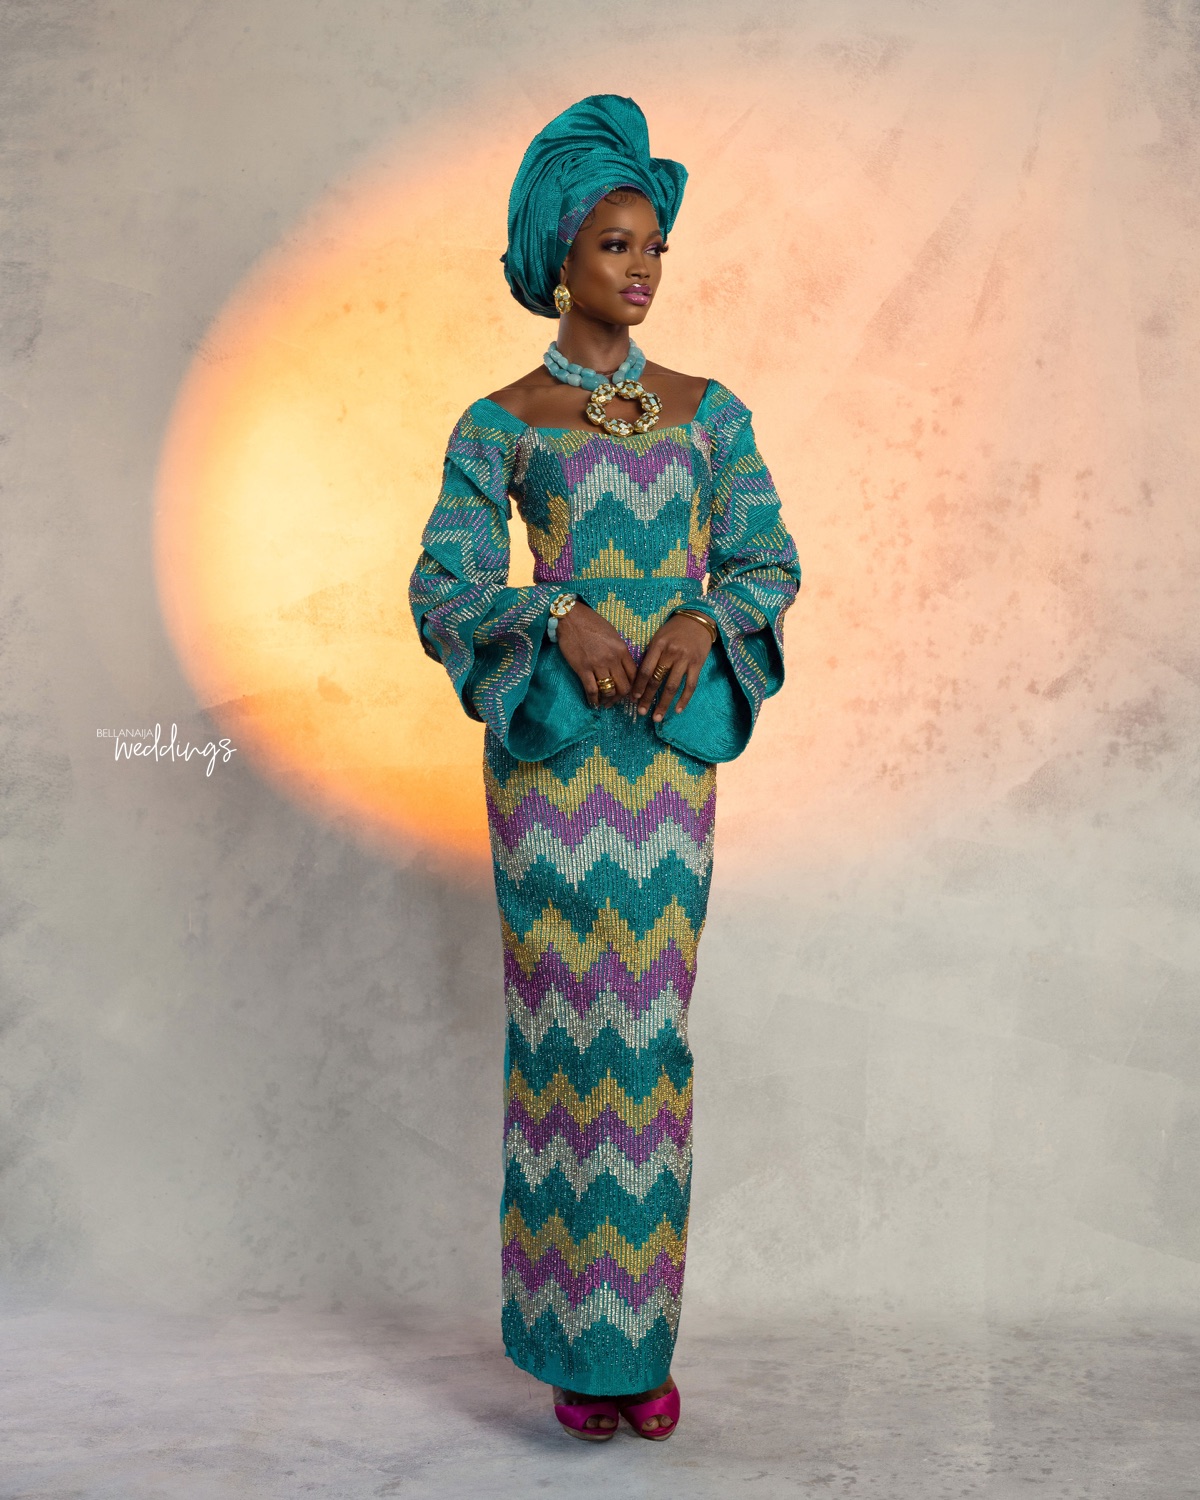 African style crush: Check out this exquisite Irawo Collection by Toju Foyeh, EntertainmentSA News South Africa